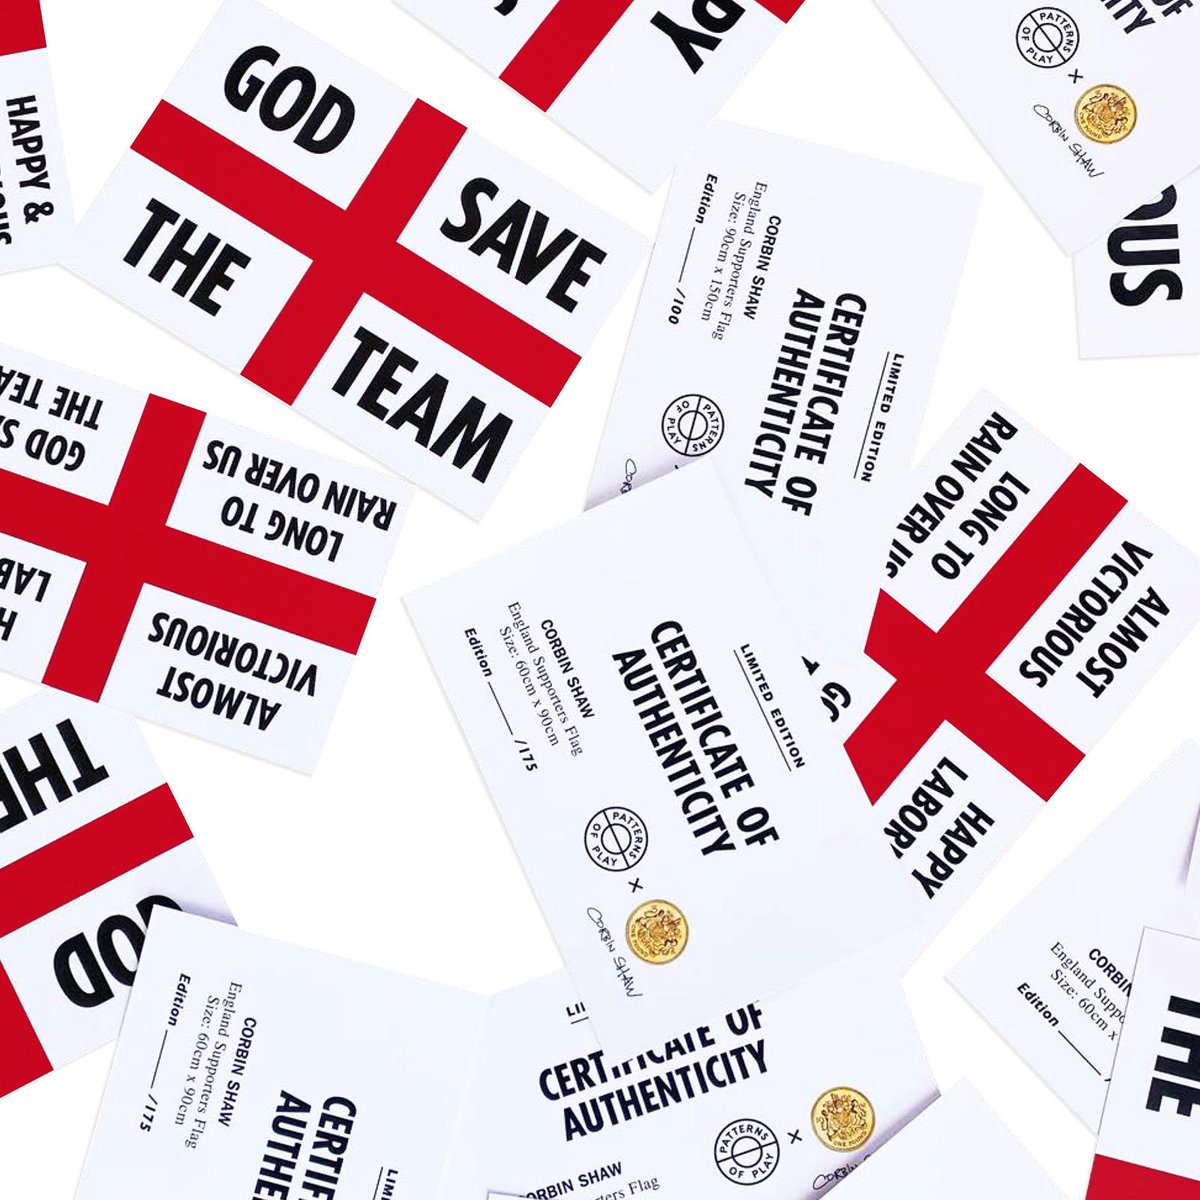 Online Now: Limited edition England supporters flags by @corbinshaww x @patternsofplay 🏴󠁧󠁢󠁥󠁮󠁧󠁿 Be quick! patternsofplay.co.uk